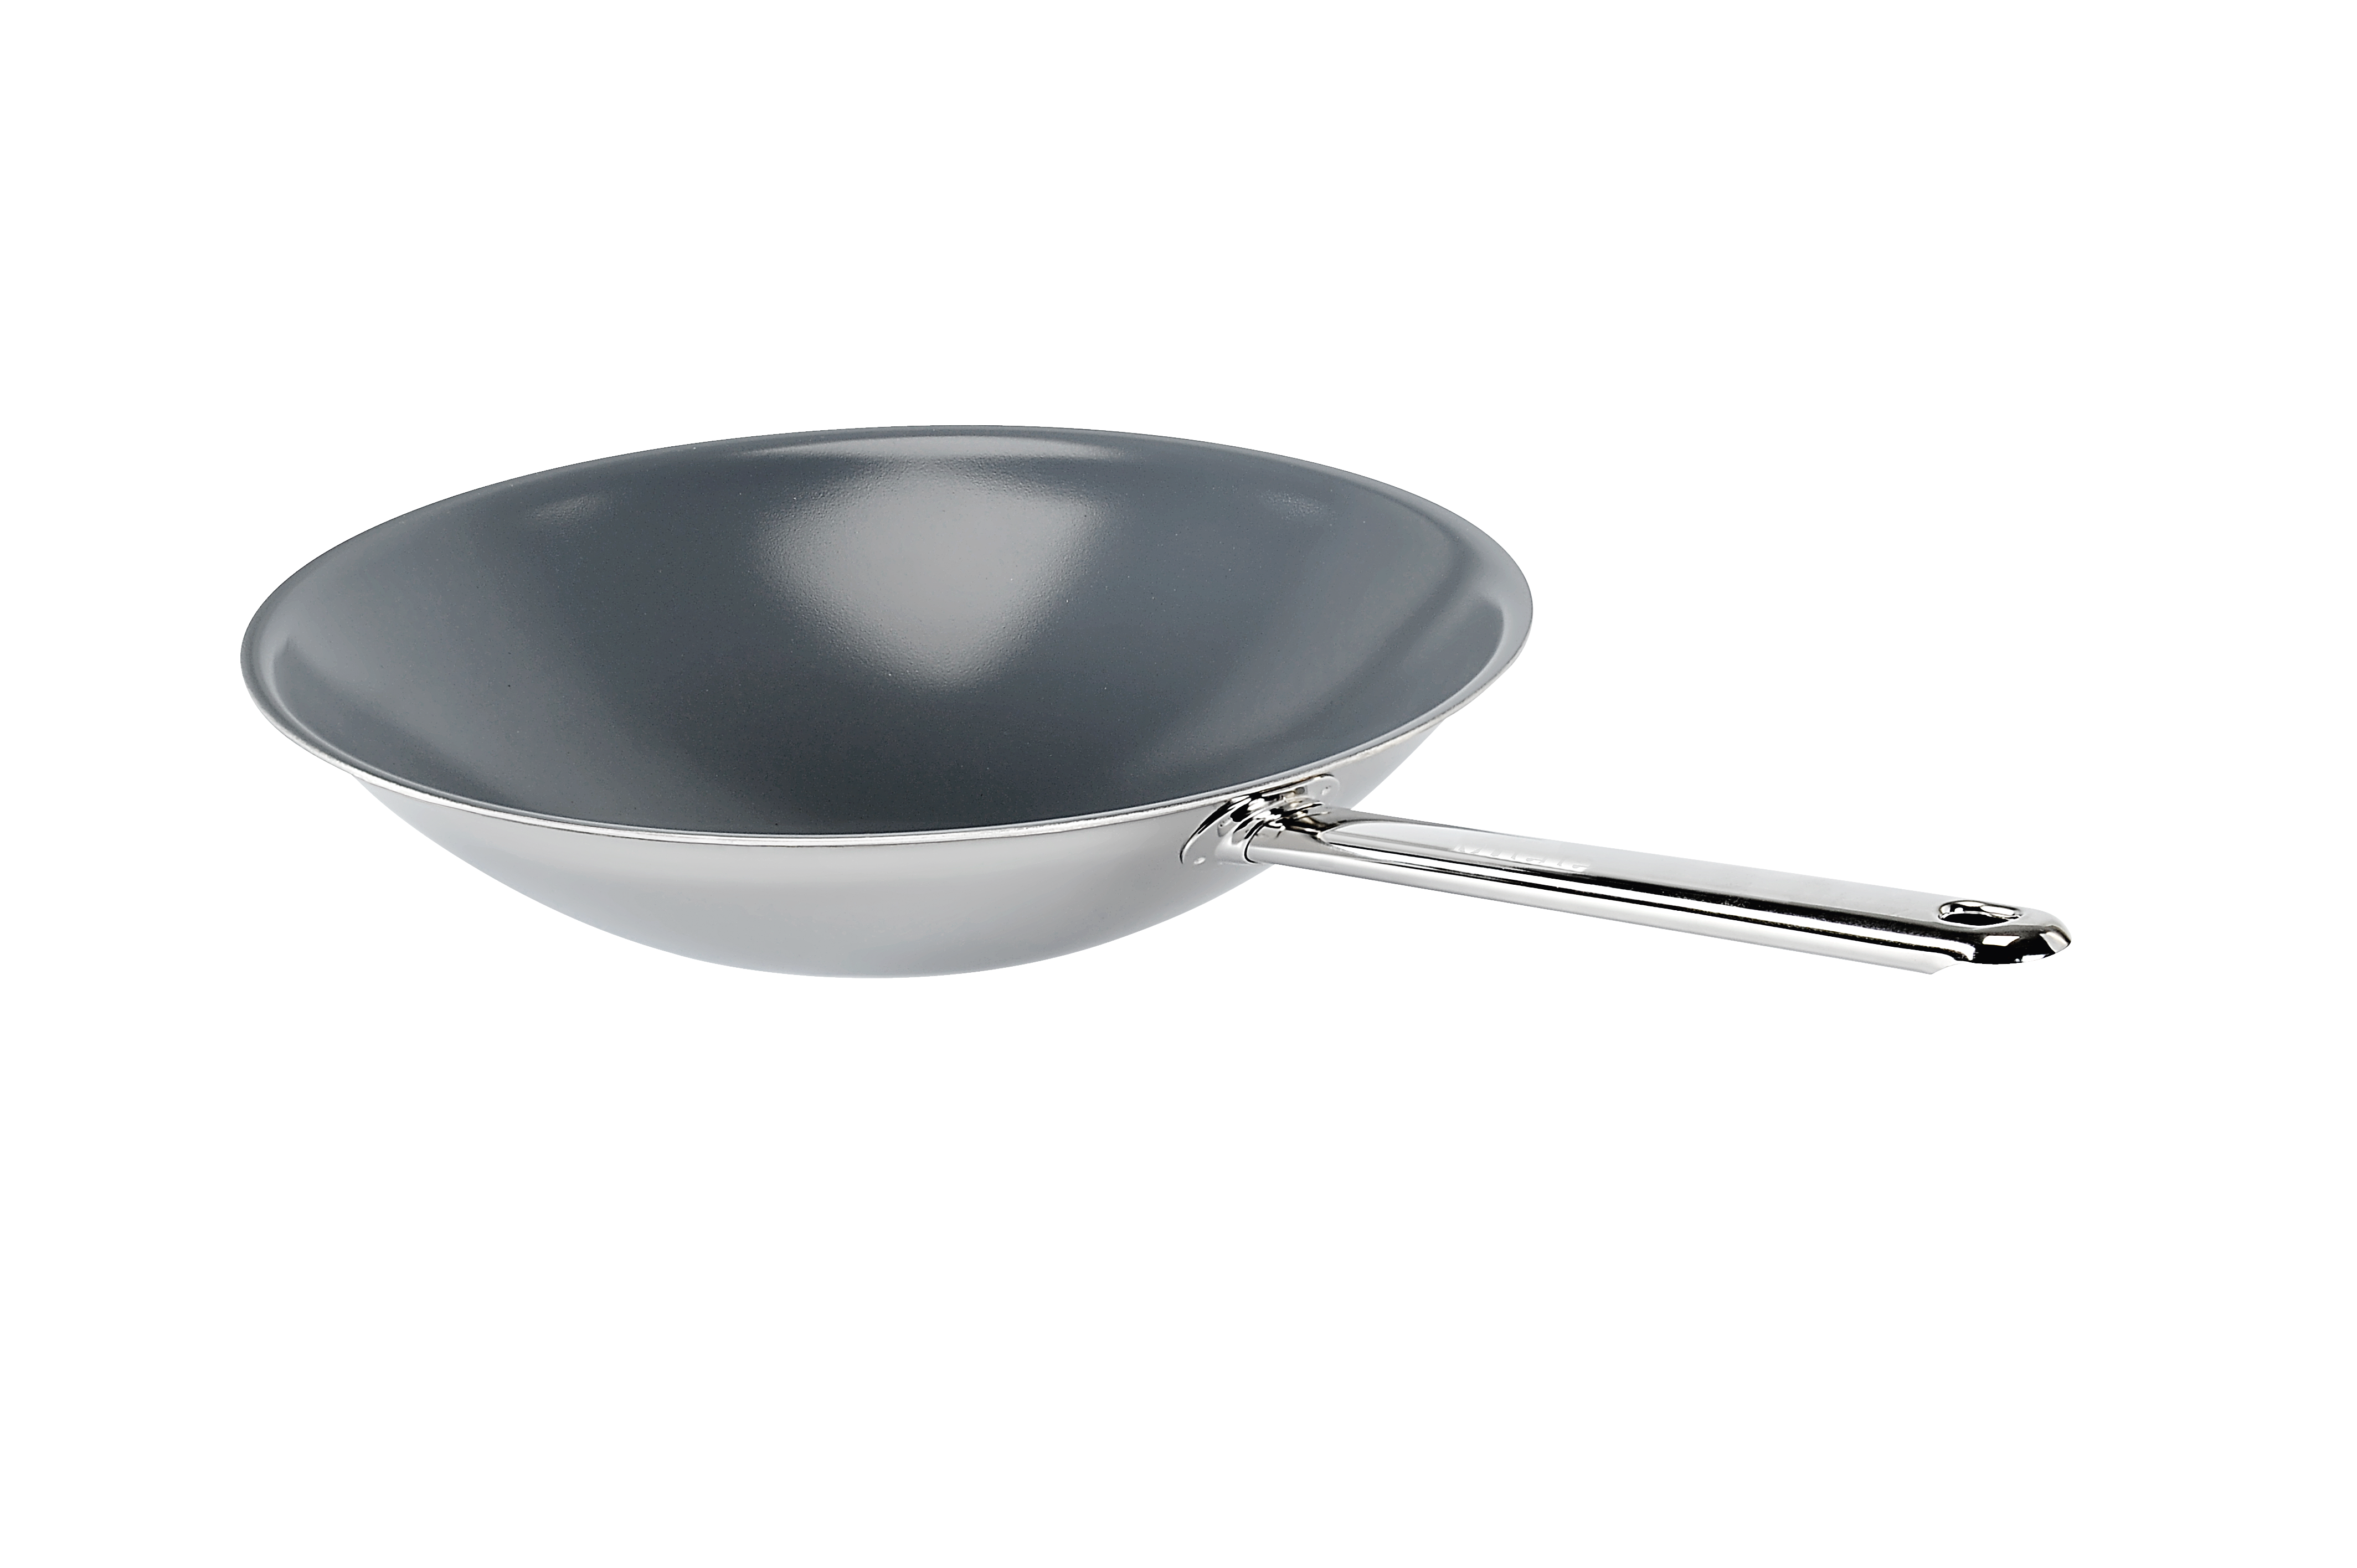 CSWP 1400Wok pan for CombiSet designed to fit perfectly into the trough of Miele's induction wok.